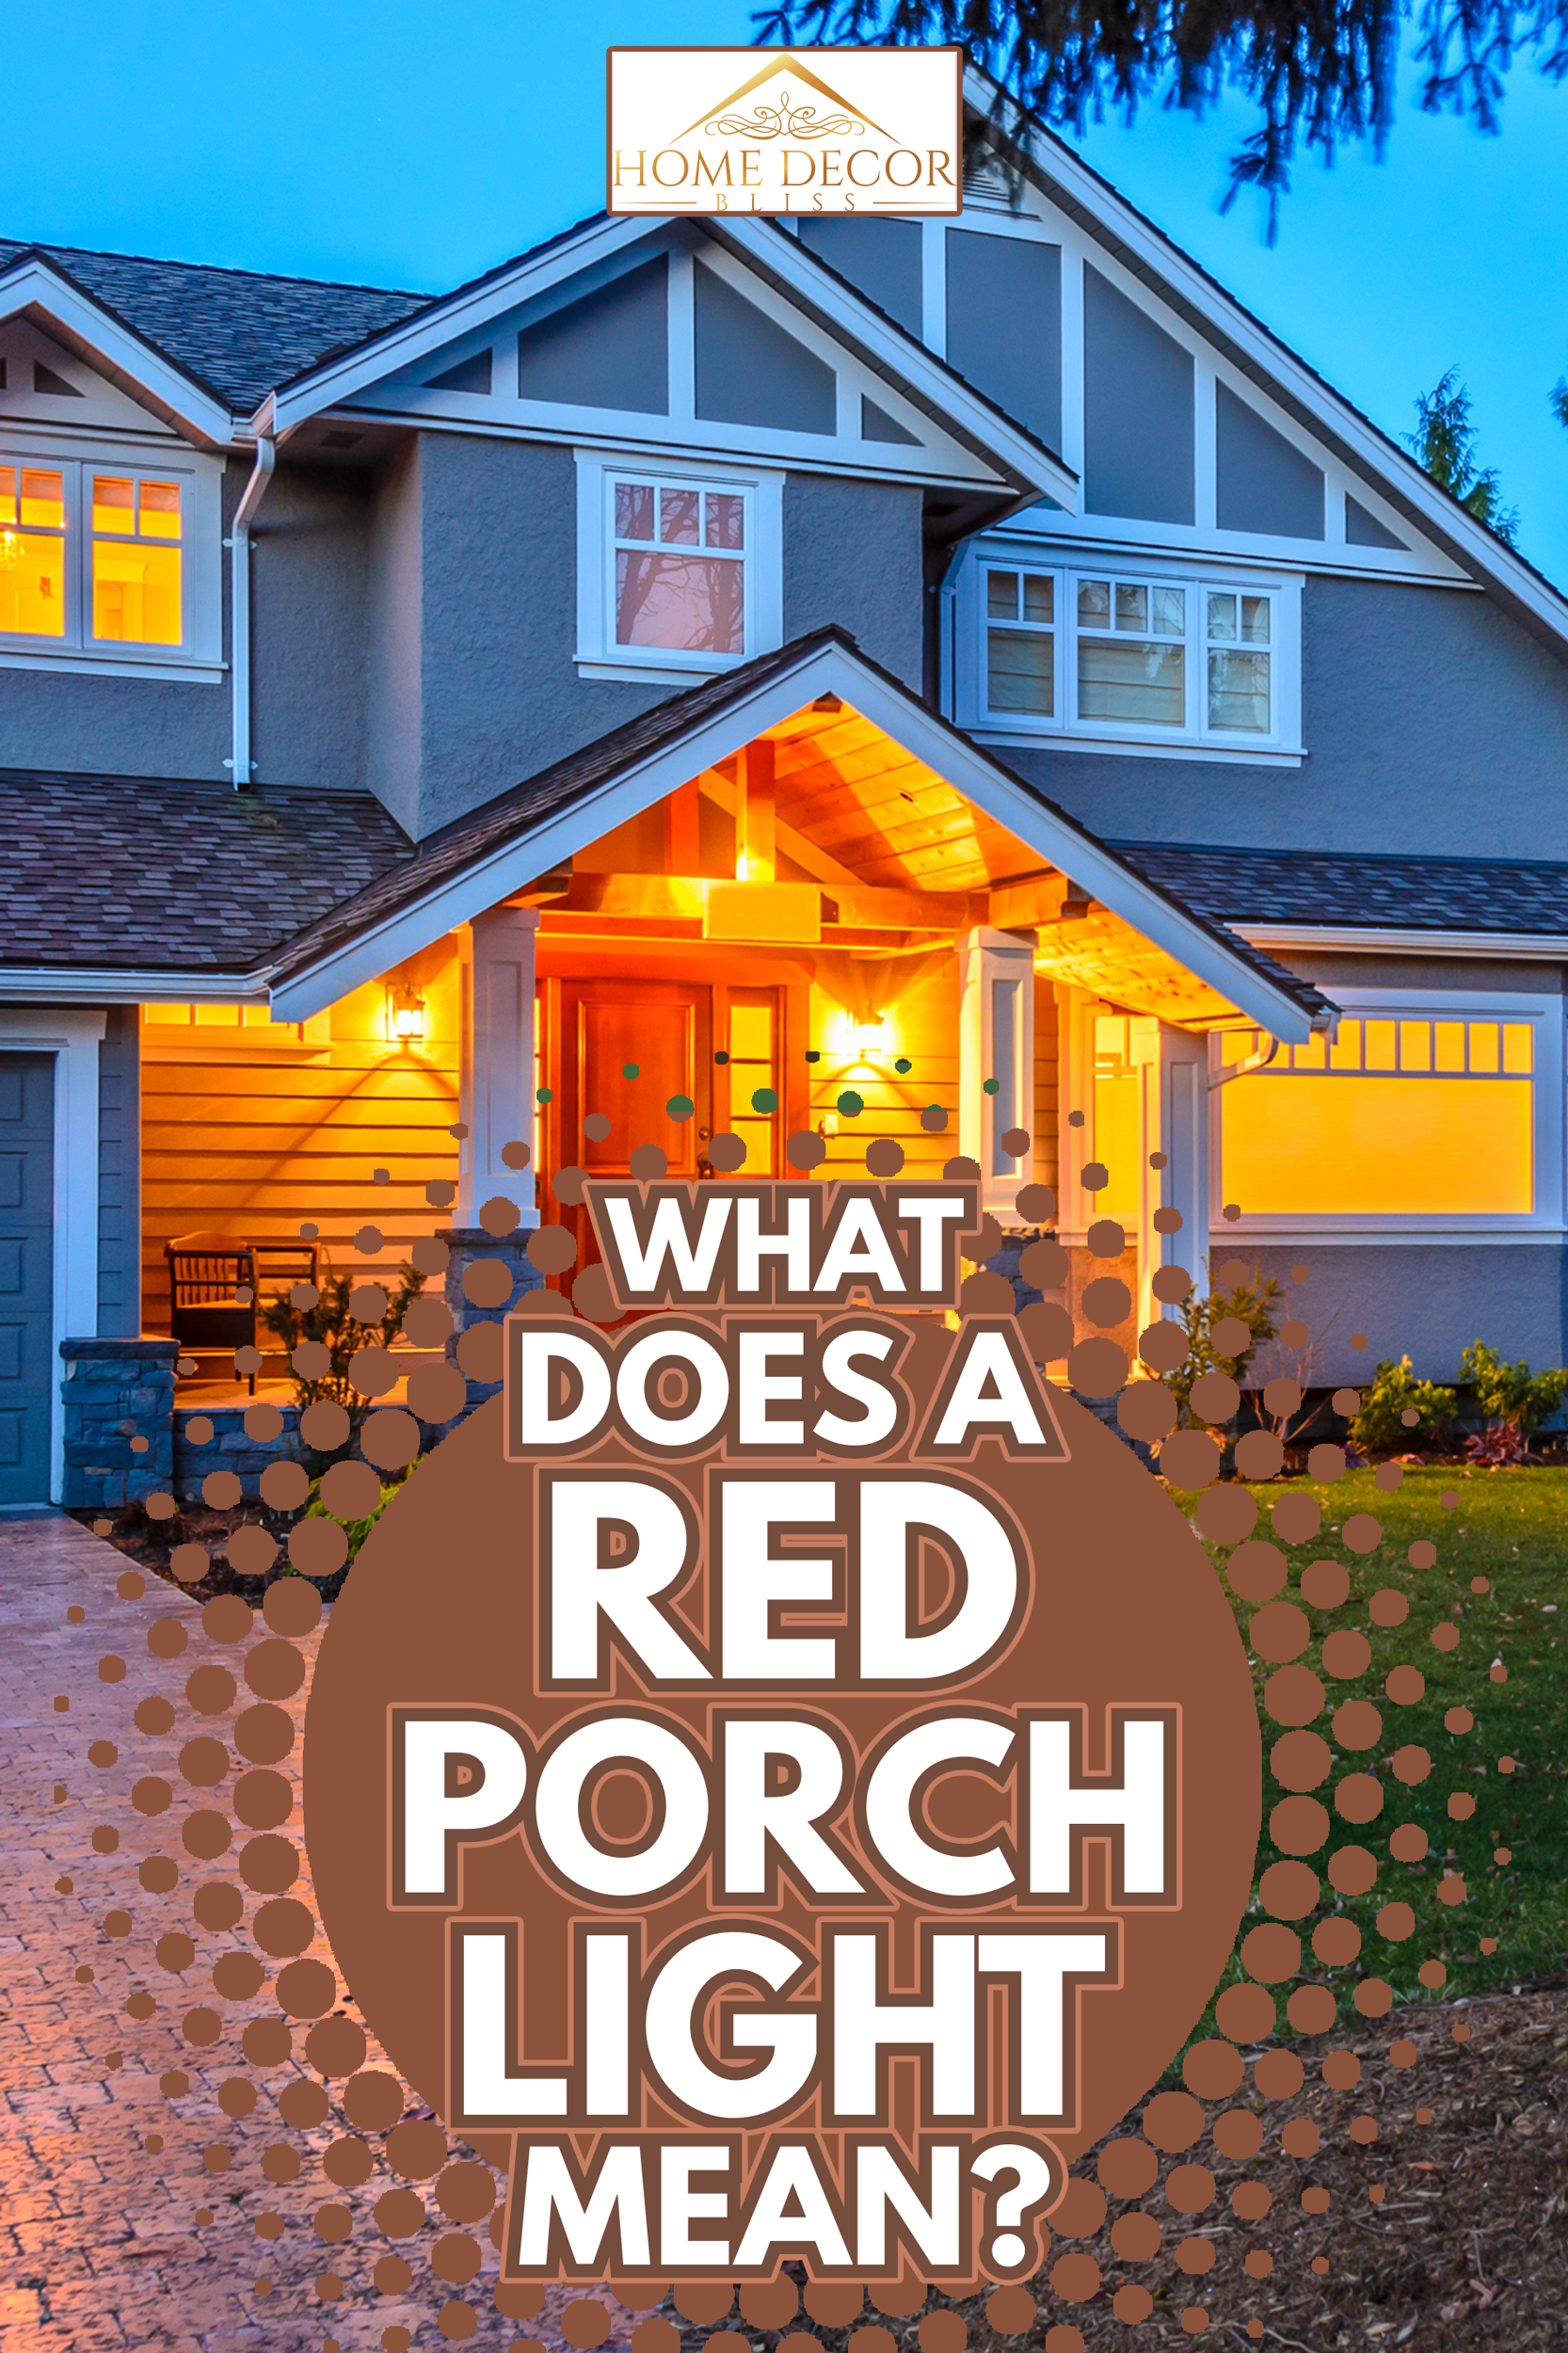 Luxury house at night - What Does A Red Porch Light Mean